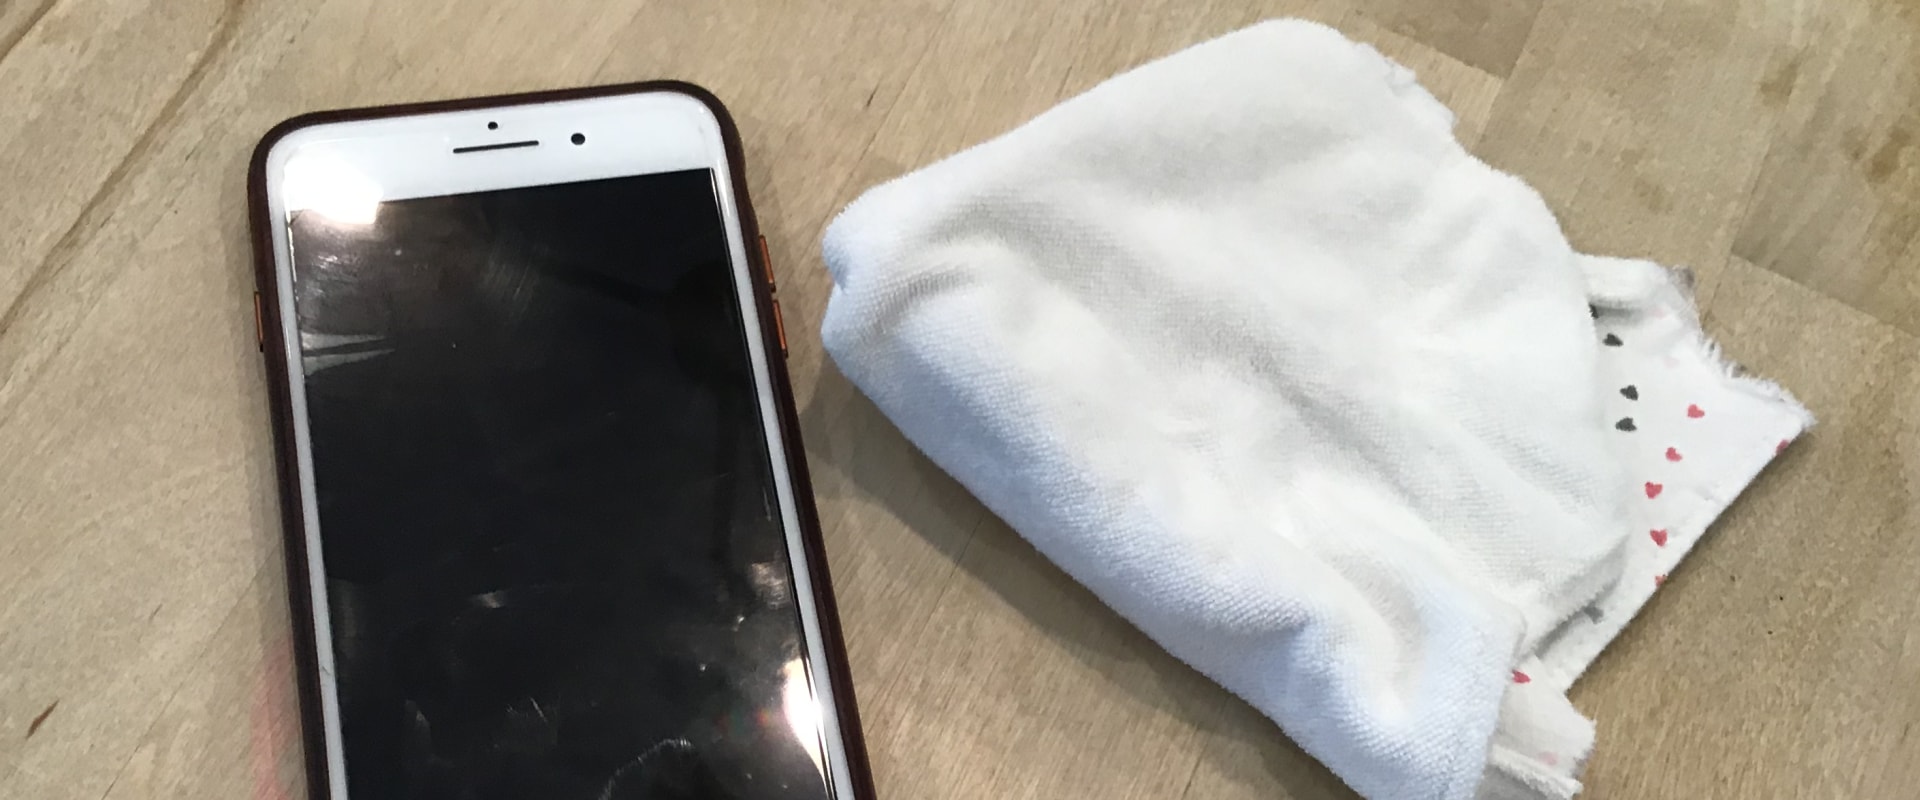 Do iphones need cleaning?